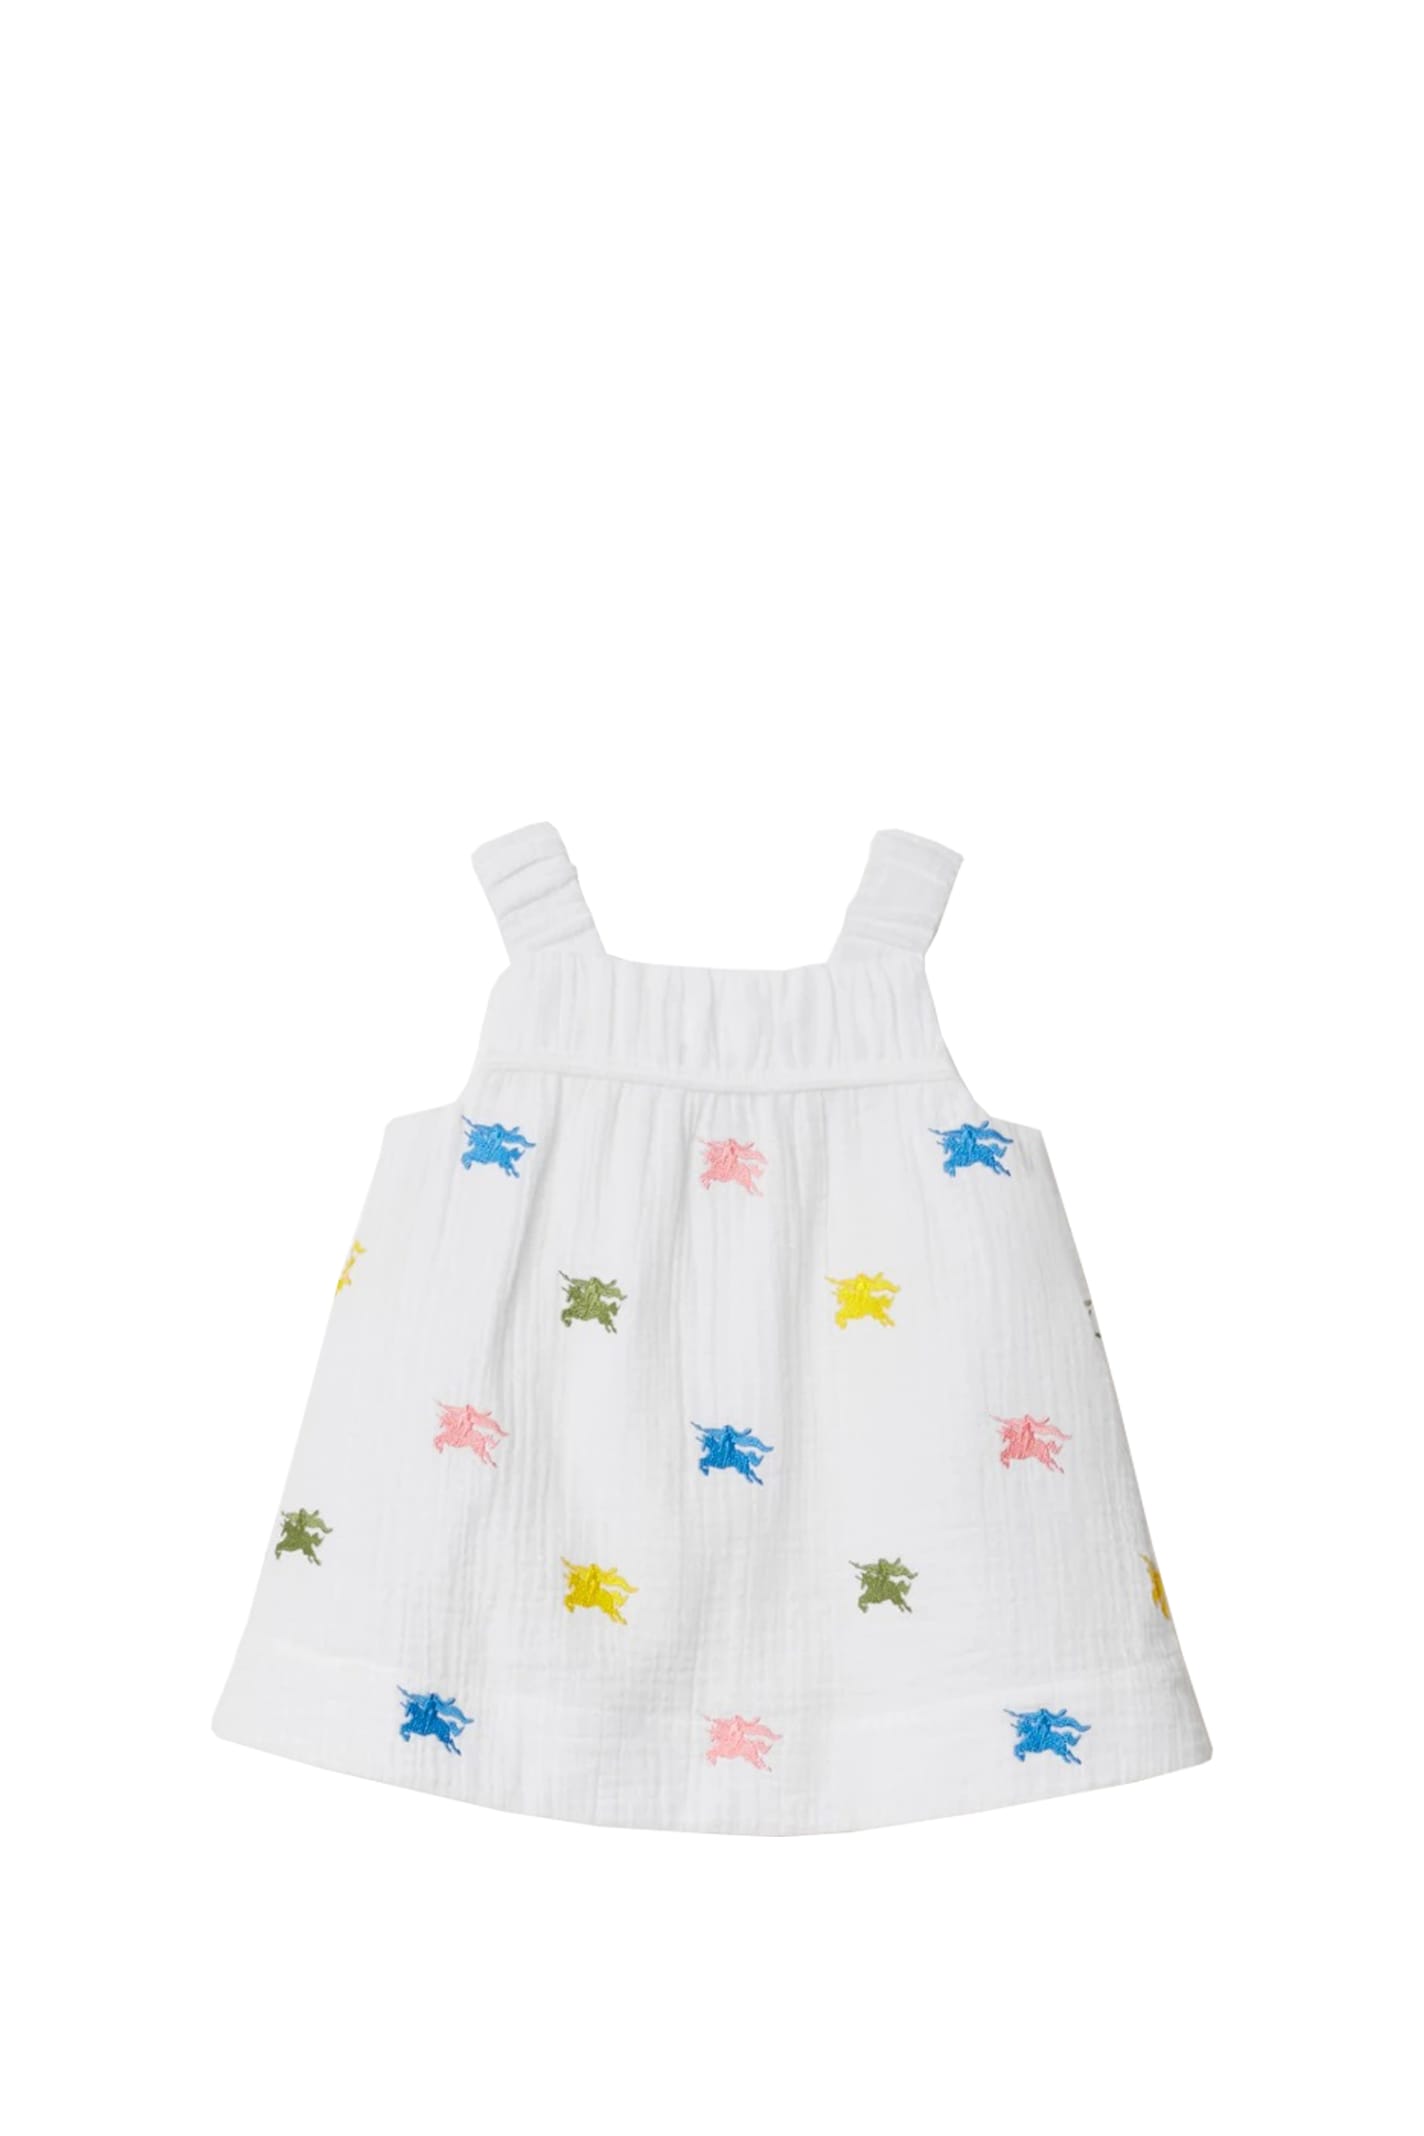 Burberry Kids' Cotton Dress And Knitches In White